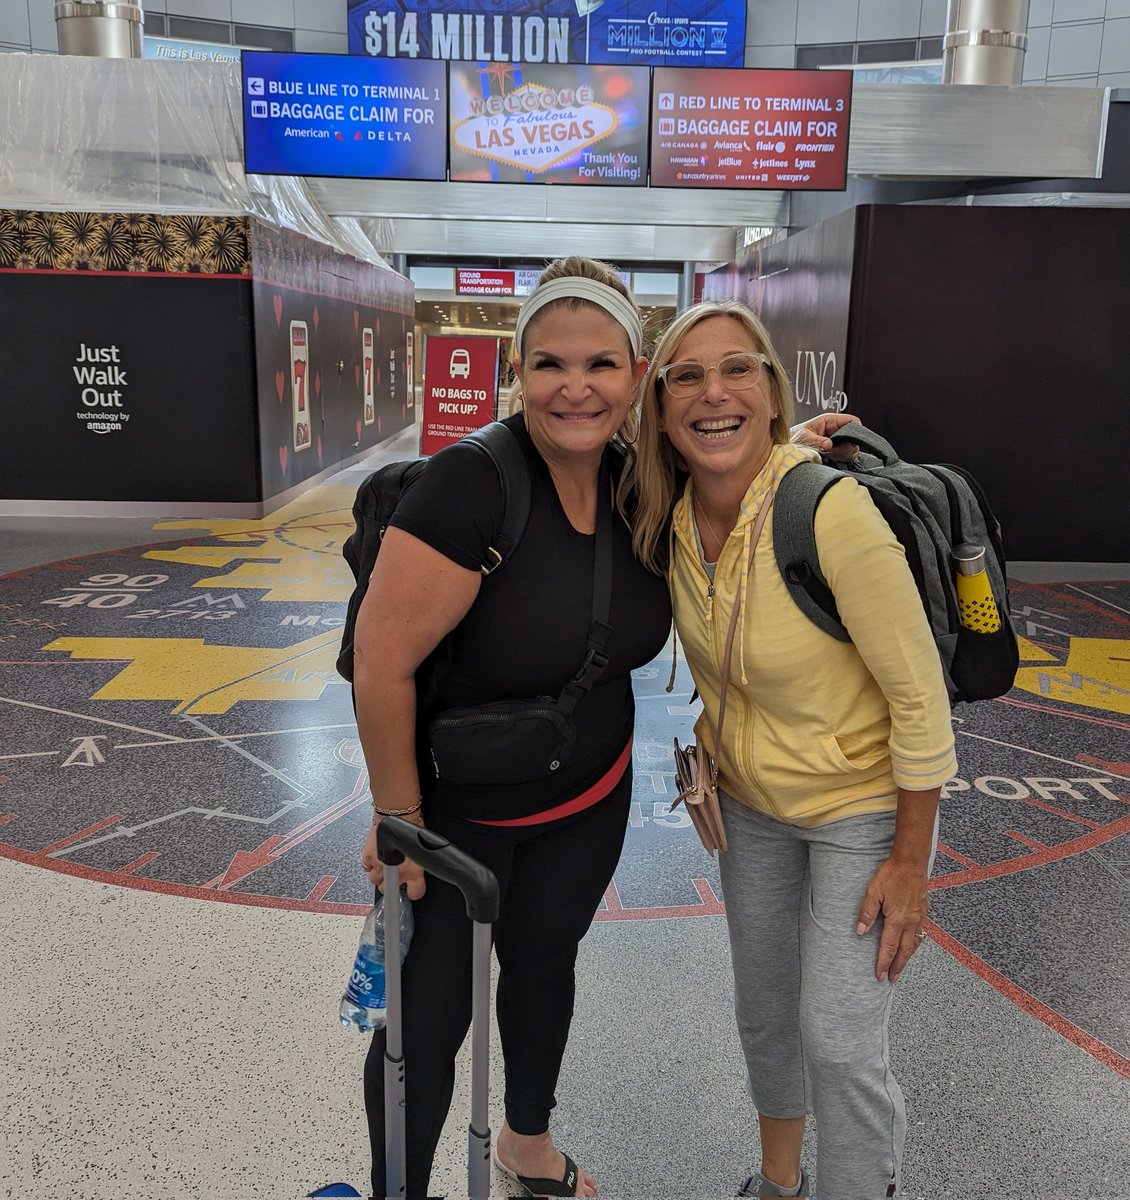 OMGOODNESS! Look who I ran into at the Vegas airport. It's @DrJCarrington 😃 I'm totally fan girling. What a small world 🌍 How fun! So cool when you get to meet social media heroes in person. (Unplanned serendipity.)